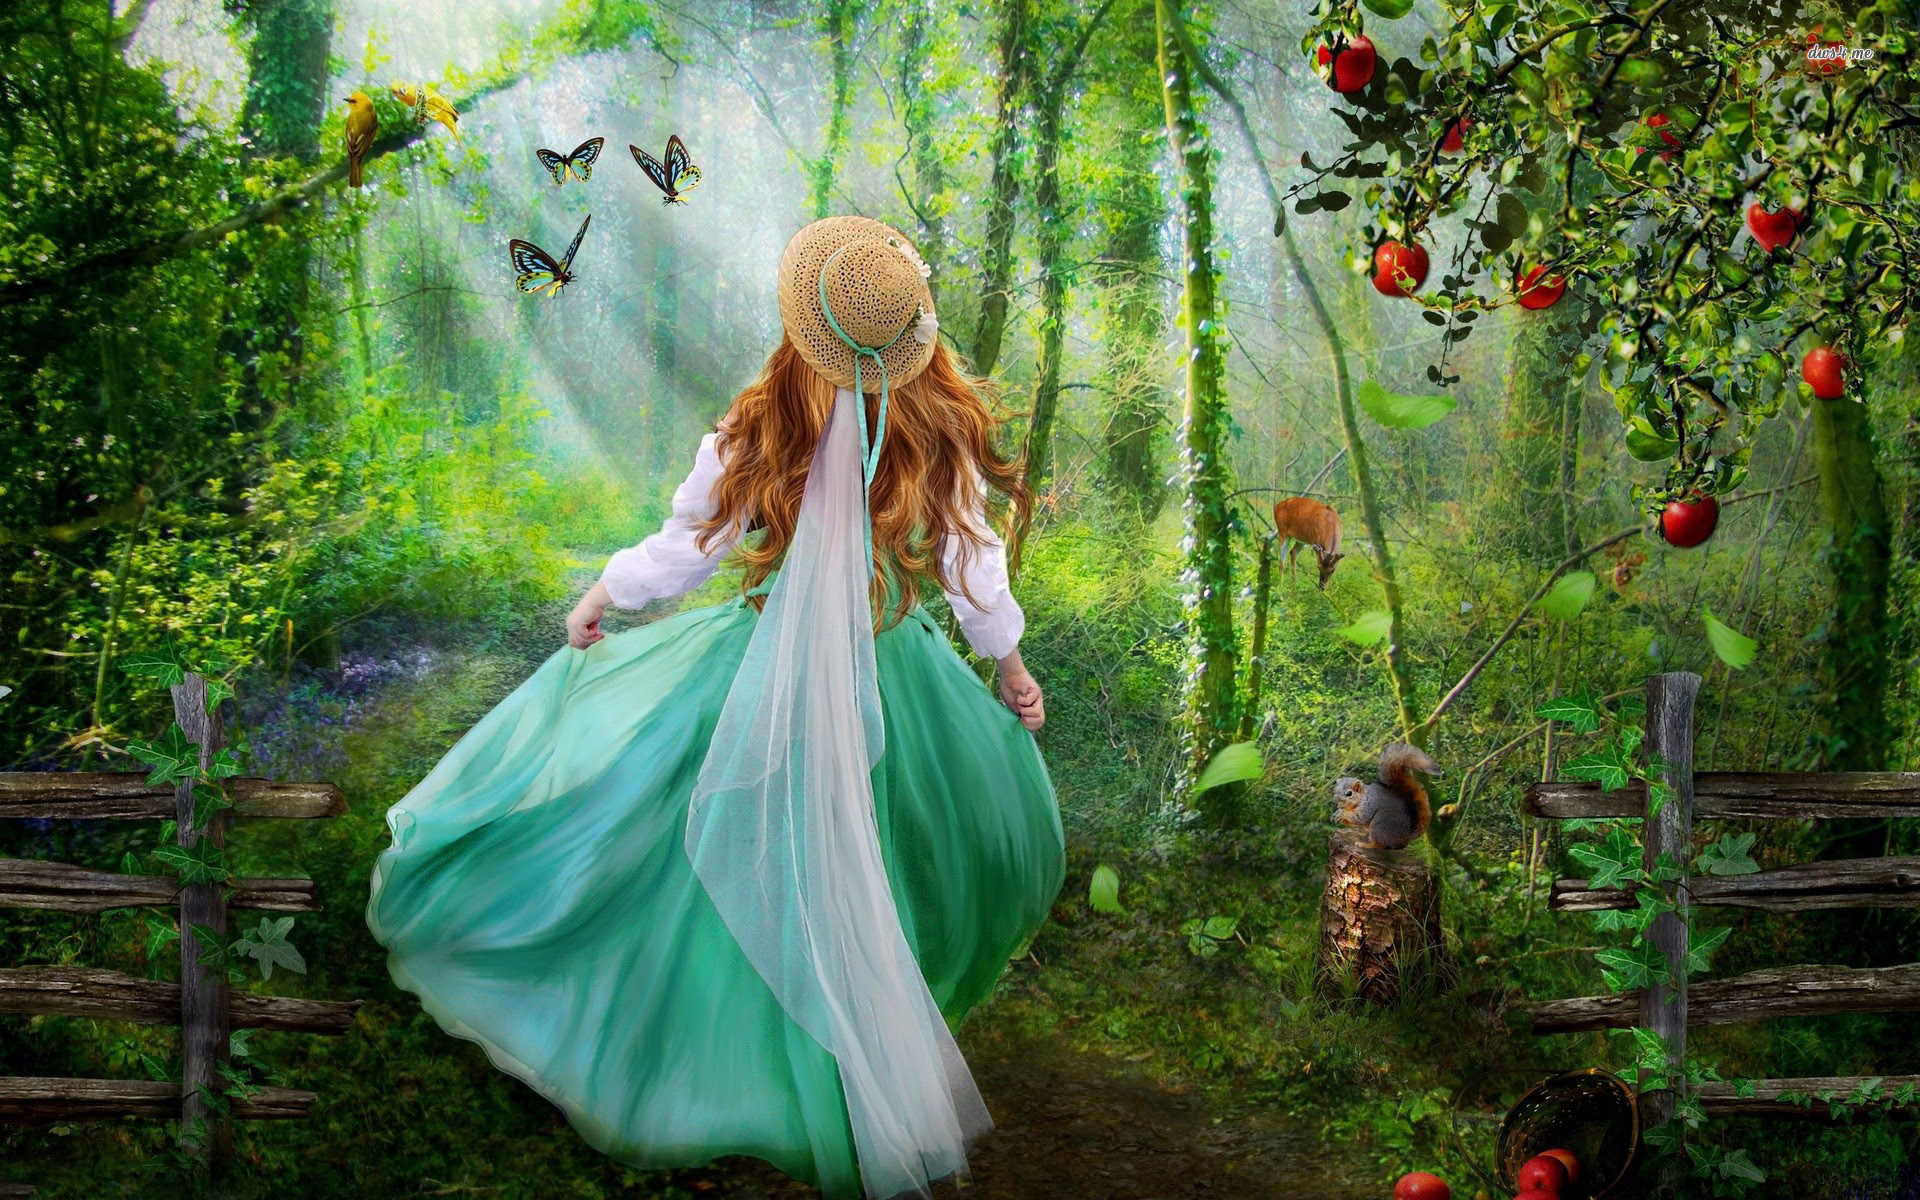 Enchanted Forest Background Stock Photos and Images - 123RF